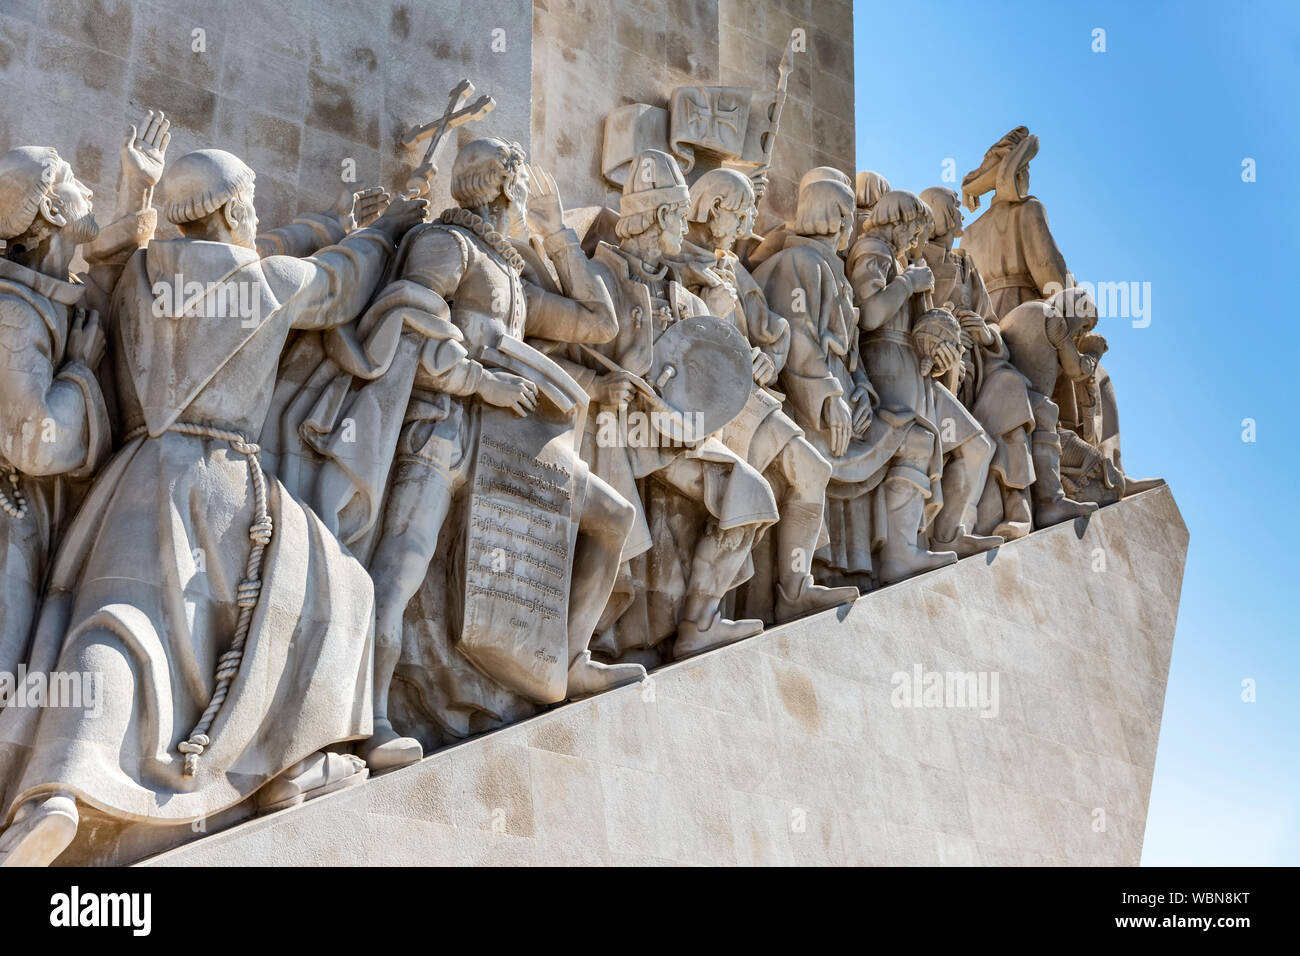 Figures on the Monument to the Discoveries of the New world, Belem, Lisbon, Portugal. Stock Photo